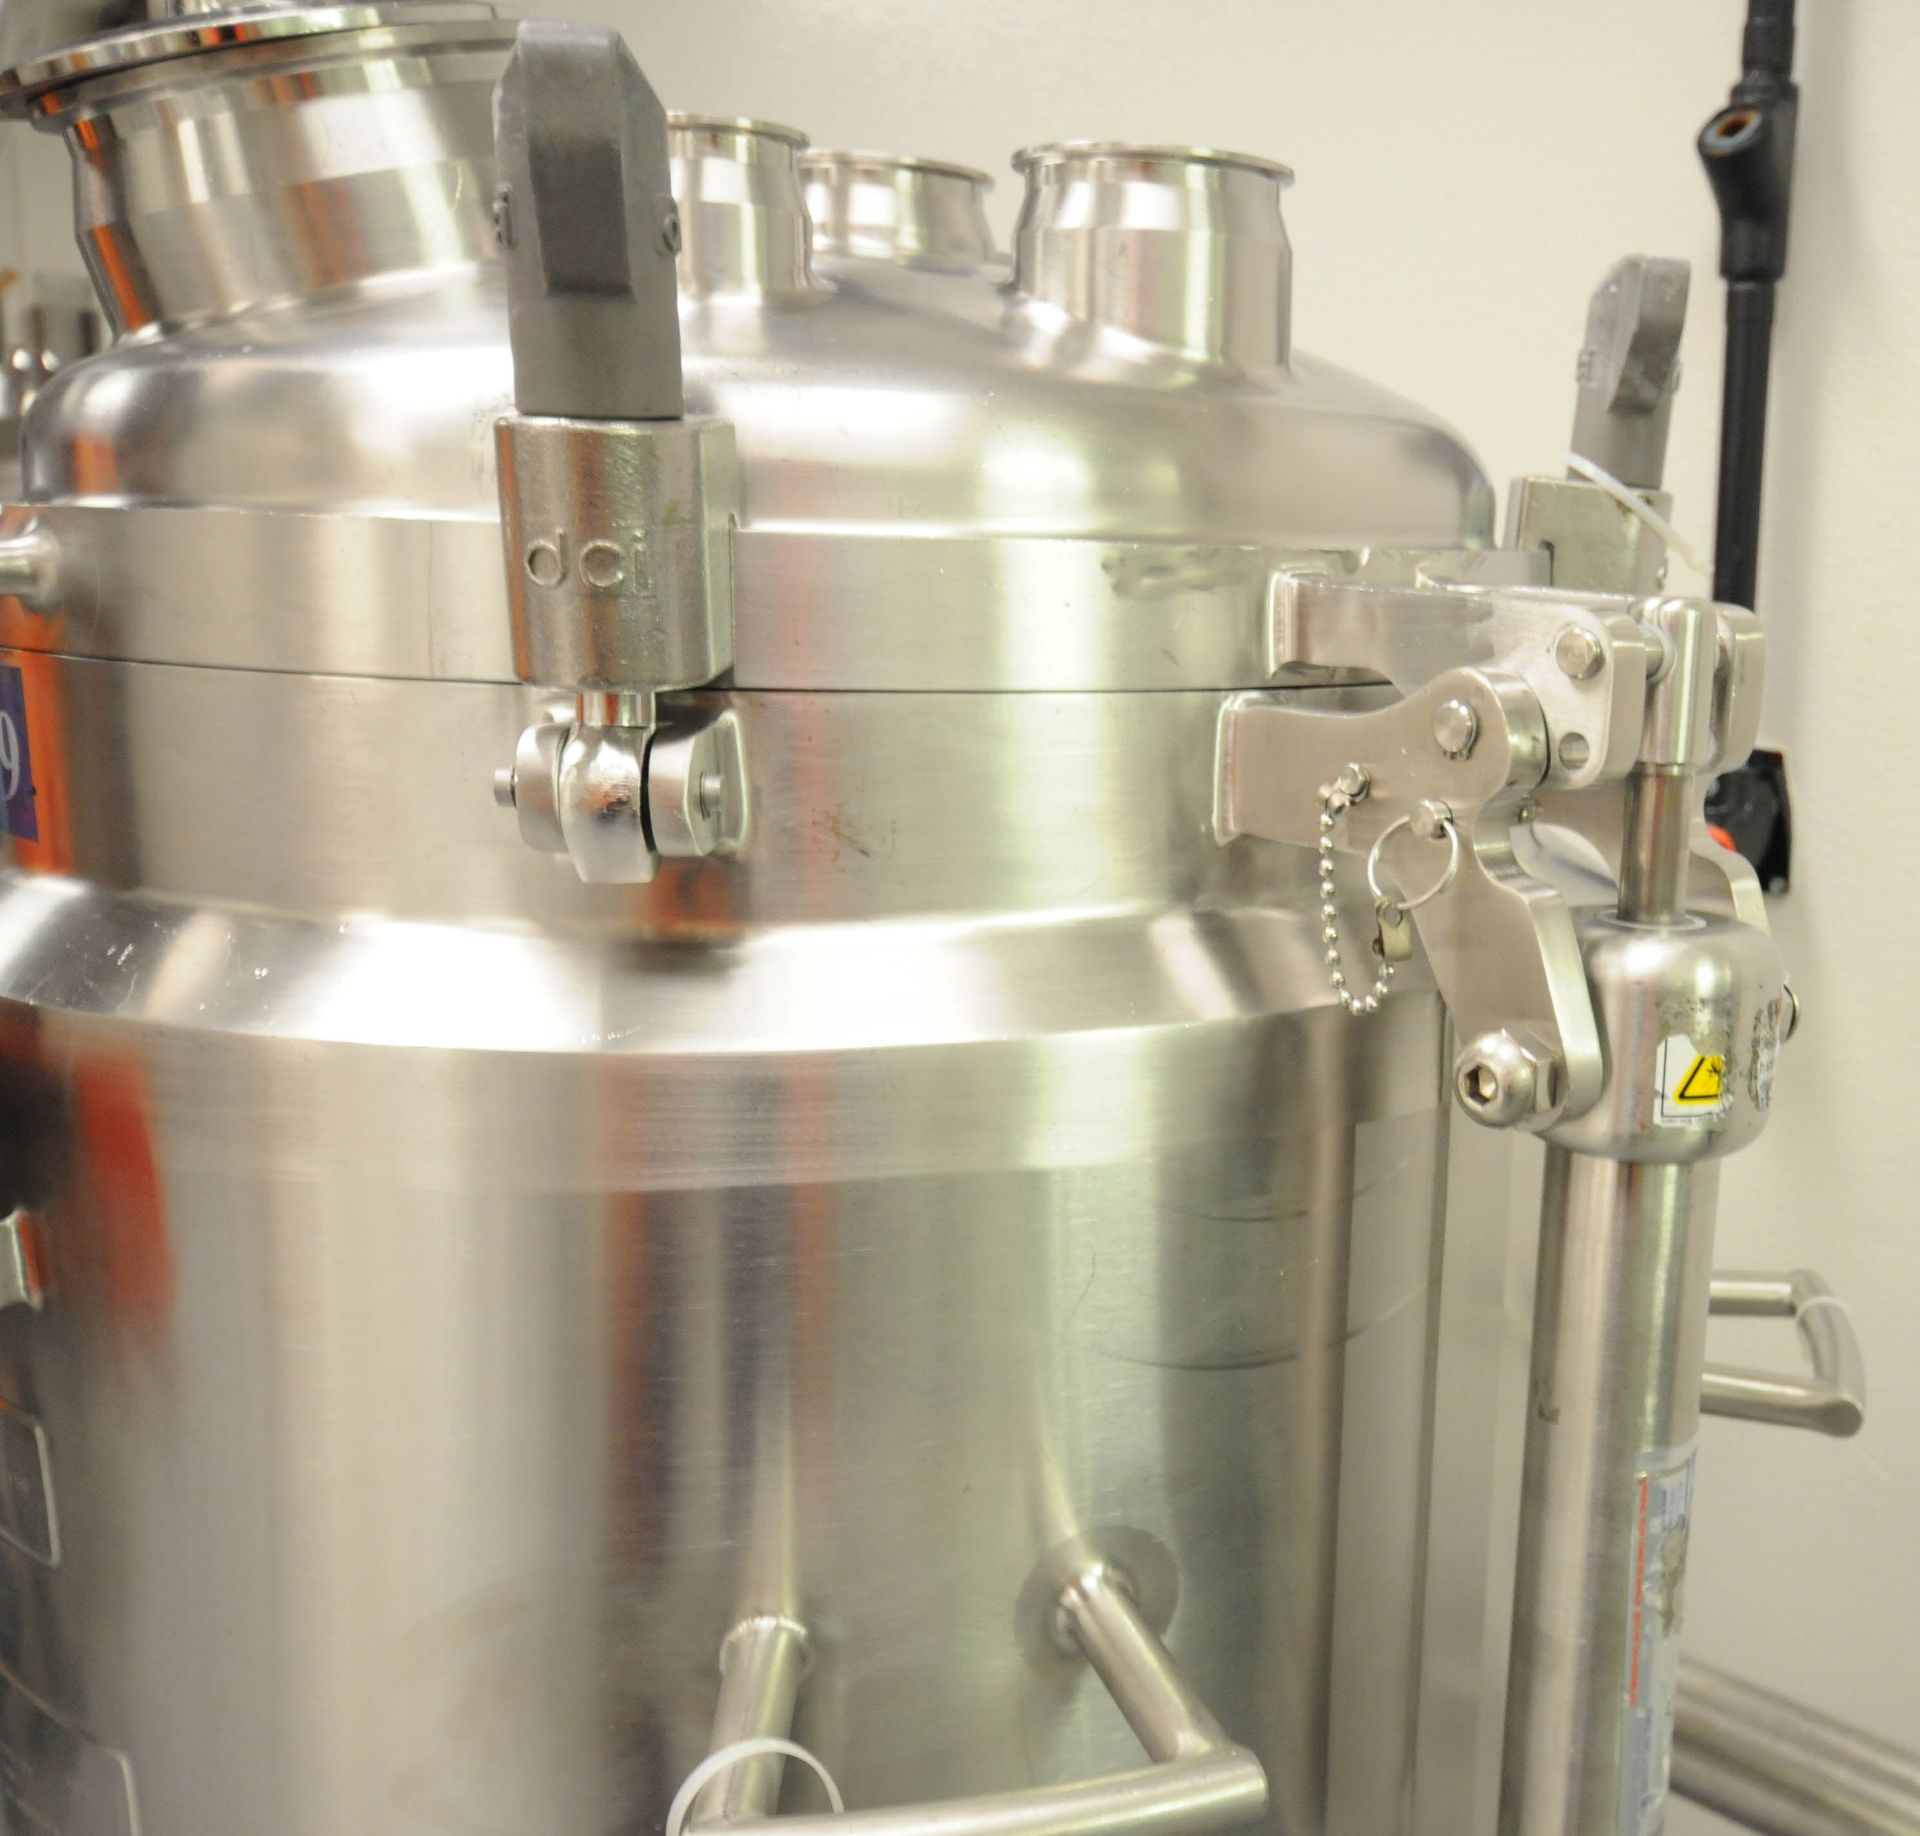 DCI (2009) PORTABLE STAINLESS STEEL TANK WITH 100 LITER CAPACITY, 45 PSIG MAWP @ 346 DEG F, 23" - Image 4 of 5